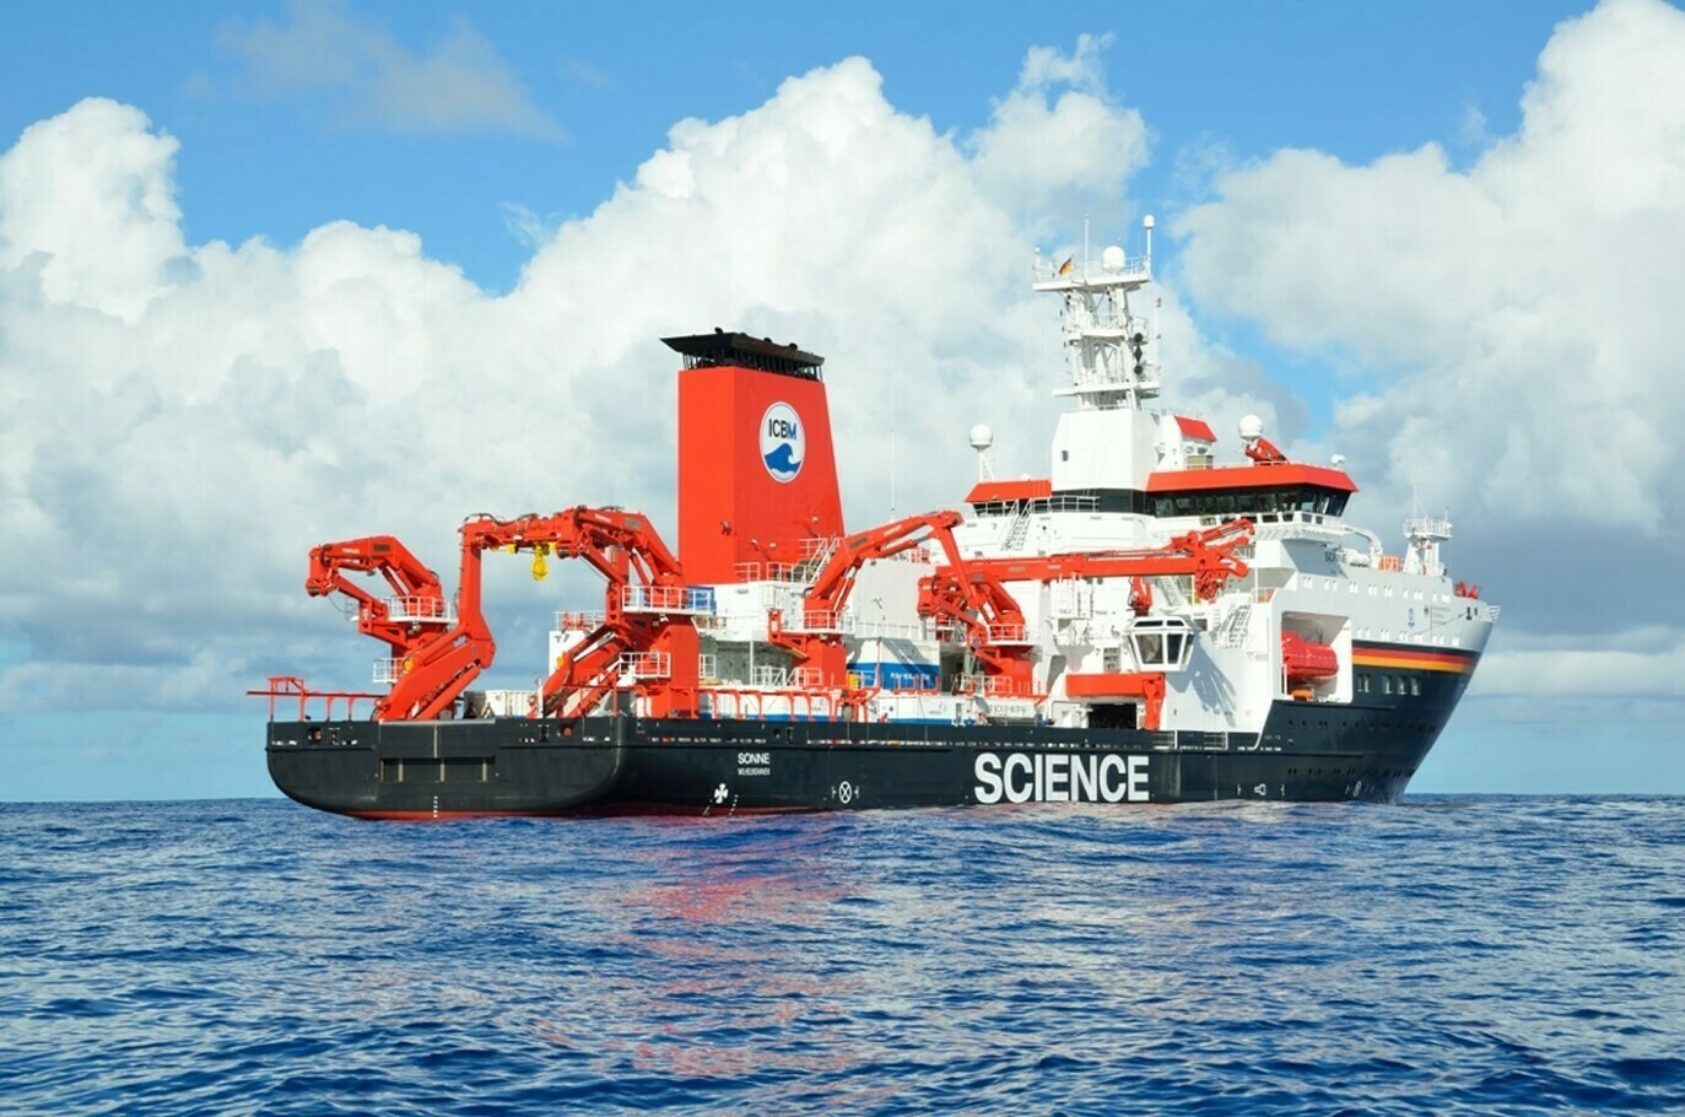 FS Sonne 2014/2015; Expedition SO237; Vema-TRANSIT; © Thomas Walter, An effort of 15 deep-sea international expeditions has allowed the analysis of abyssal sediments collected in all major oceanic regions. The German research vessel Sonne was involved in two international expeditions led by scientists from the Senckenberg institute in Germany., Sonne research vessel, , 